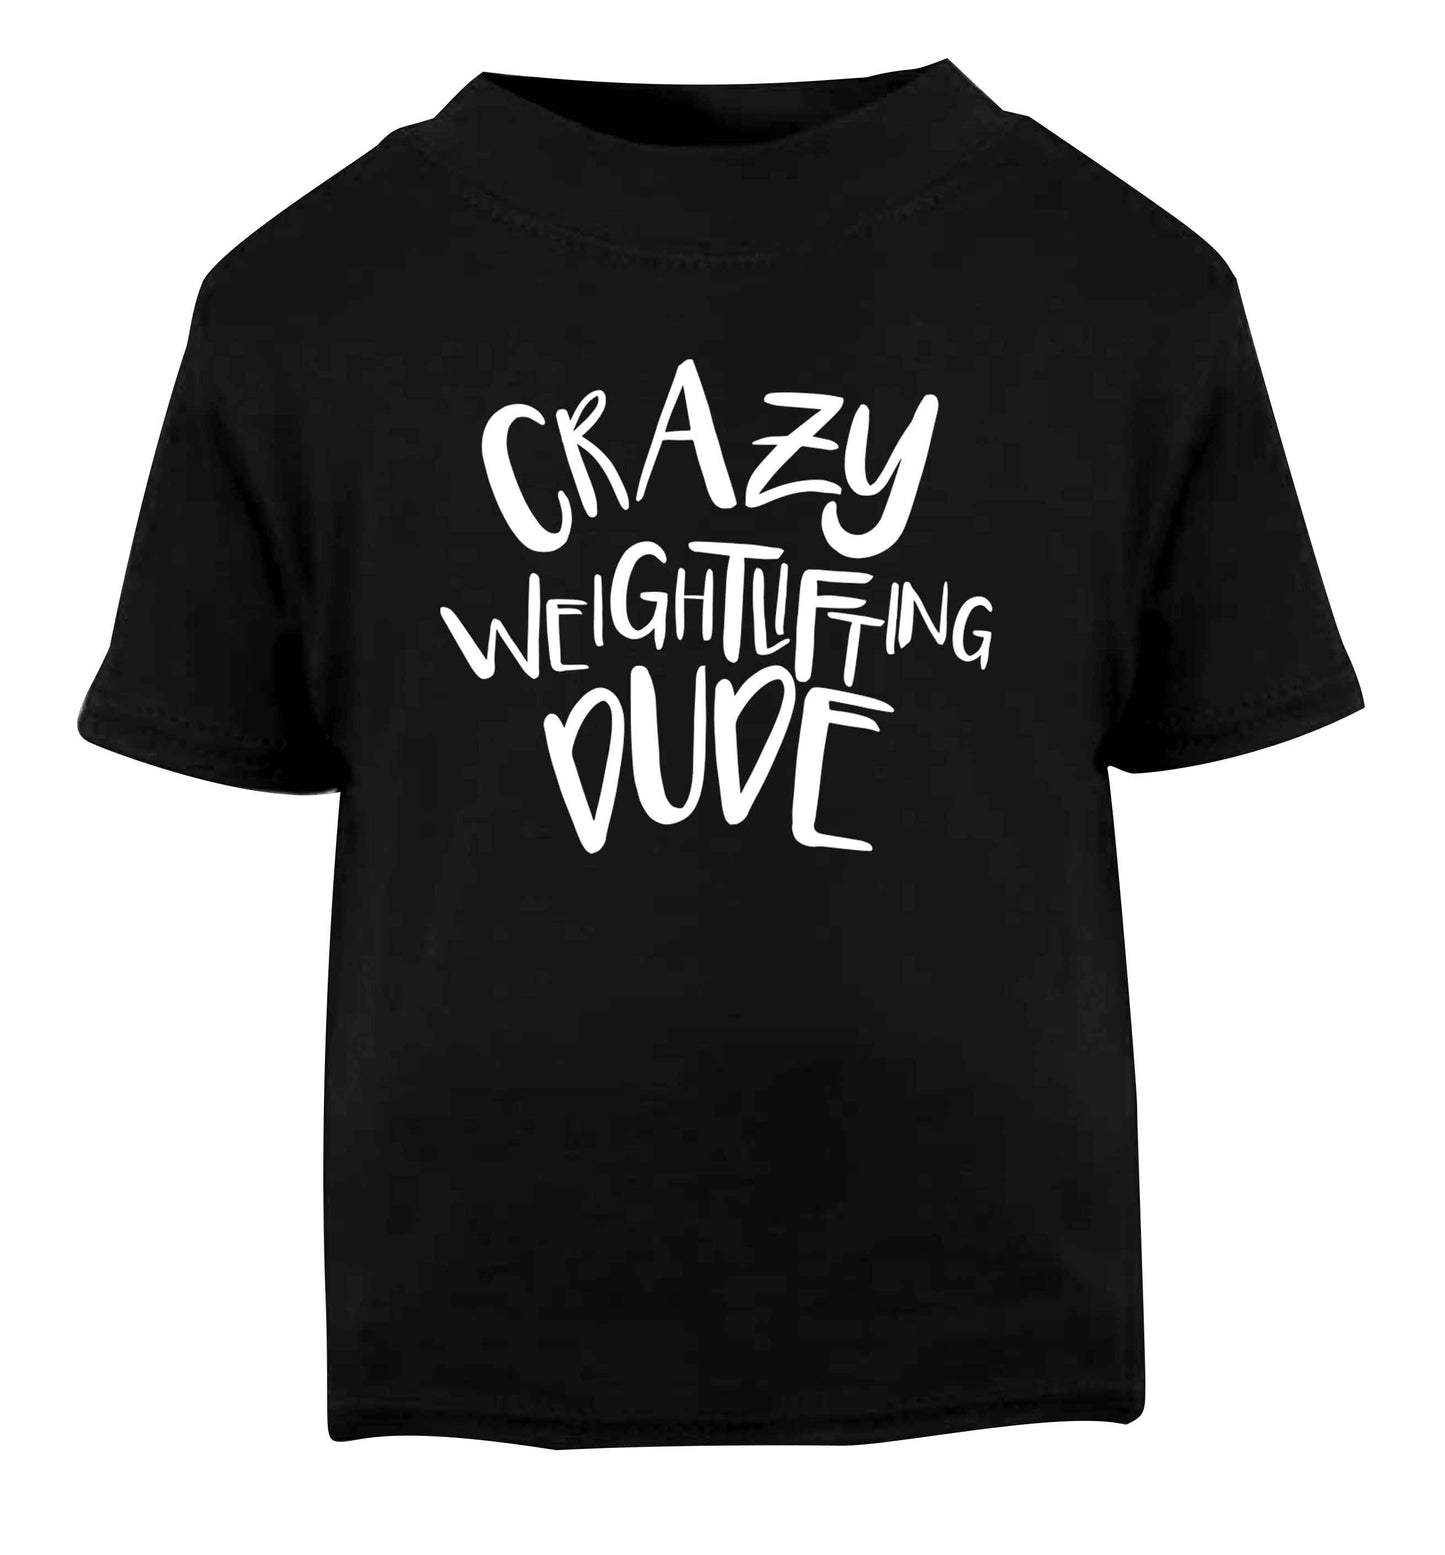 Crazy weightlifting dude Black Baby Toddler Tshirt 2 years